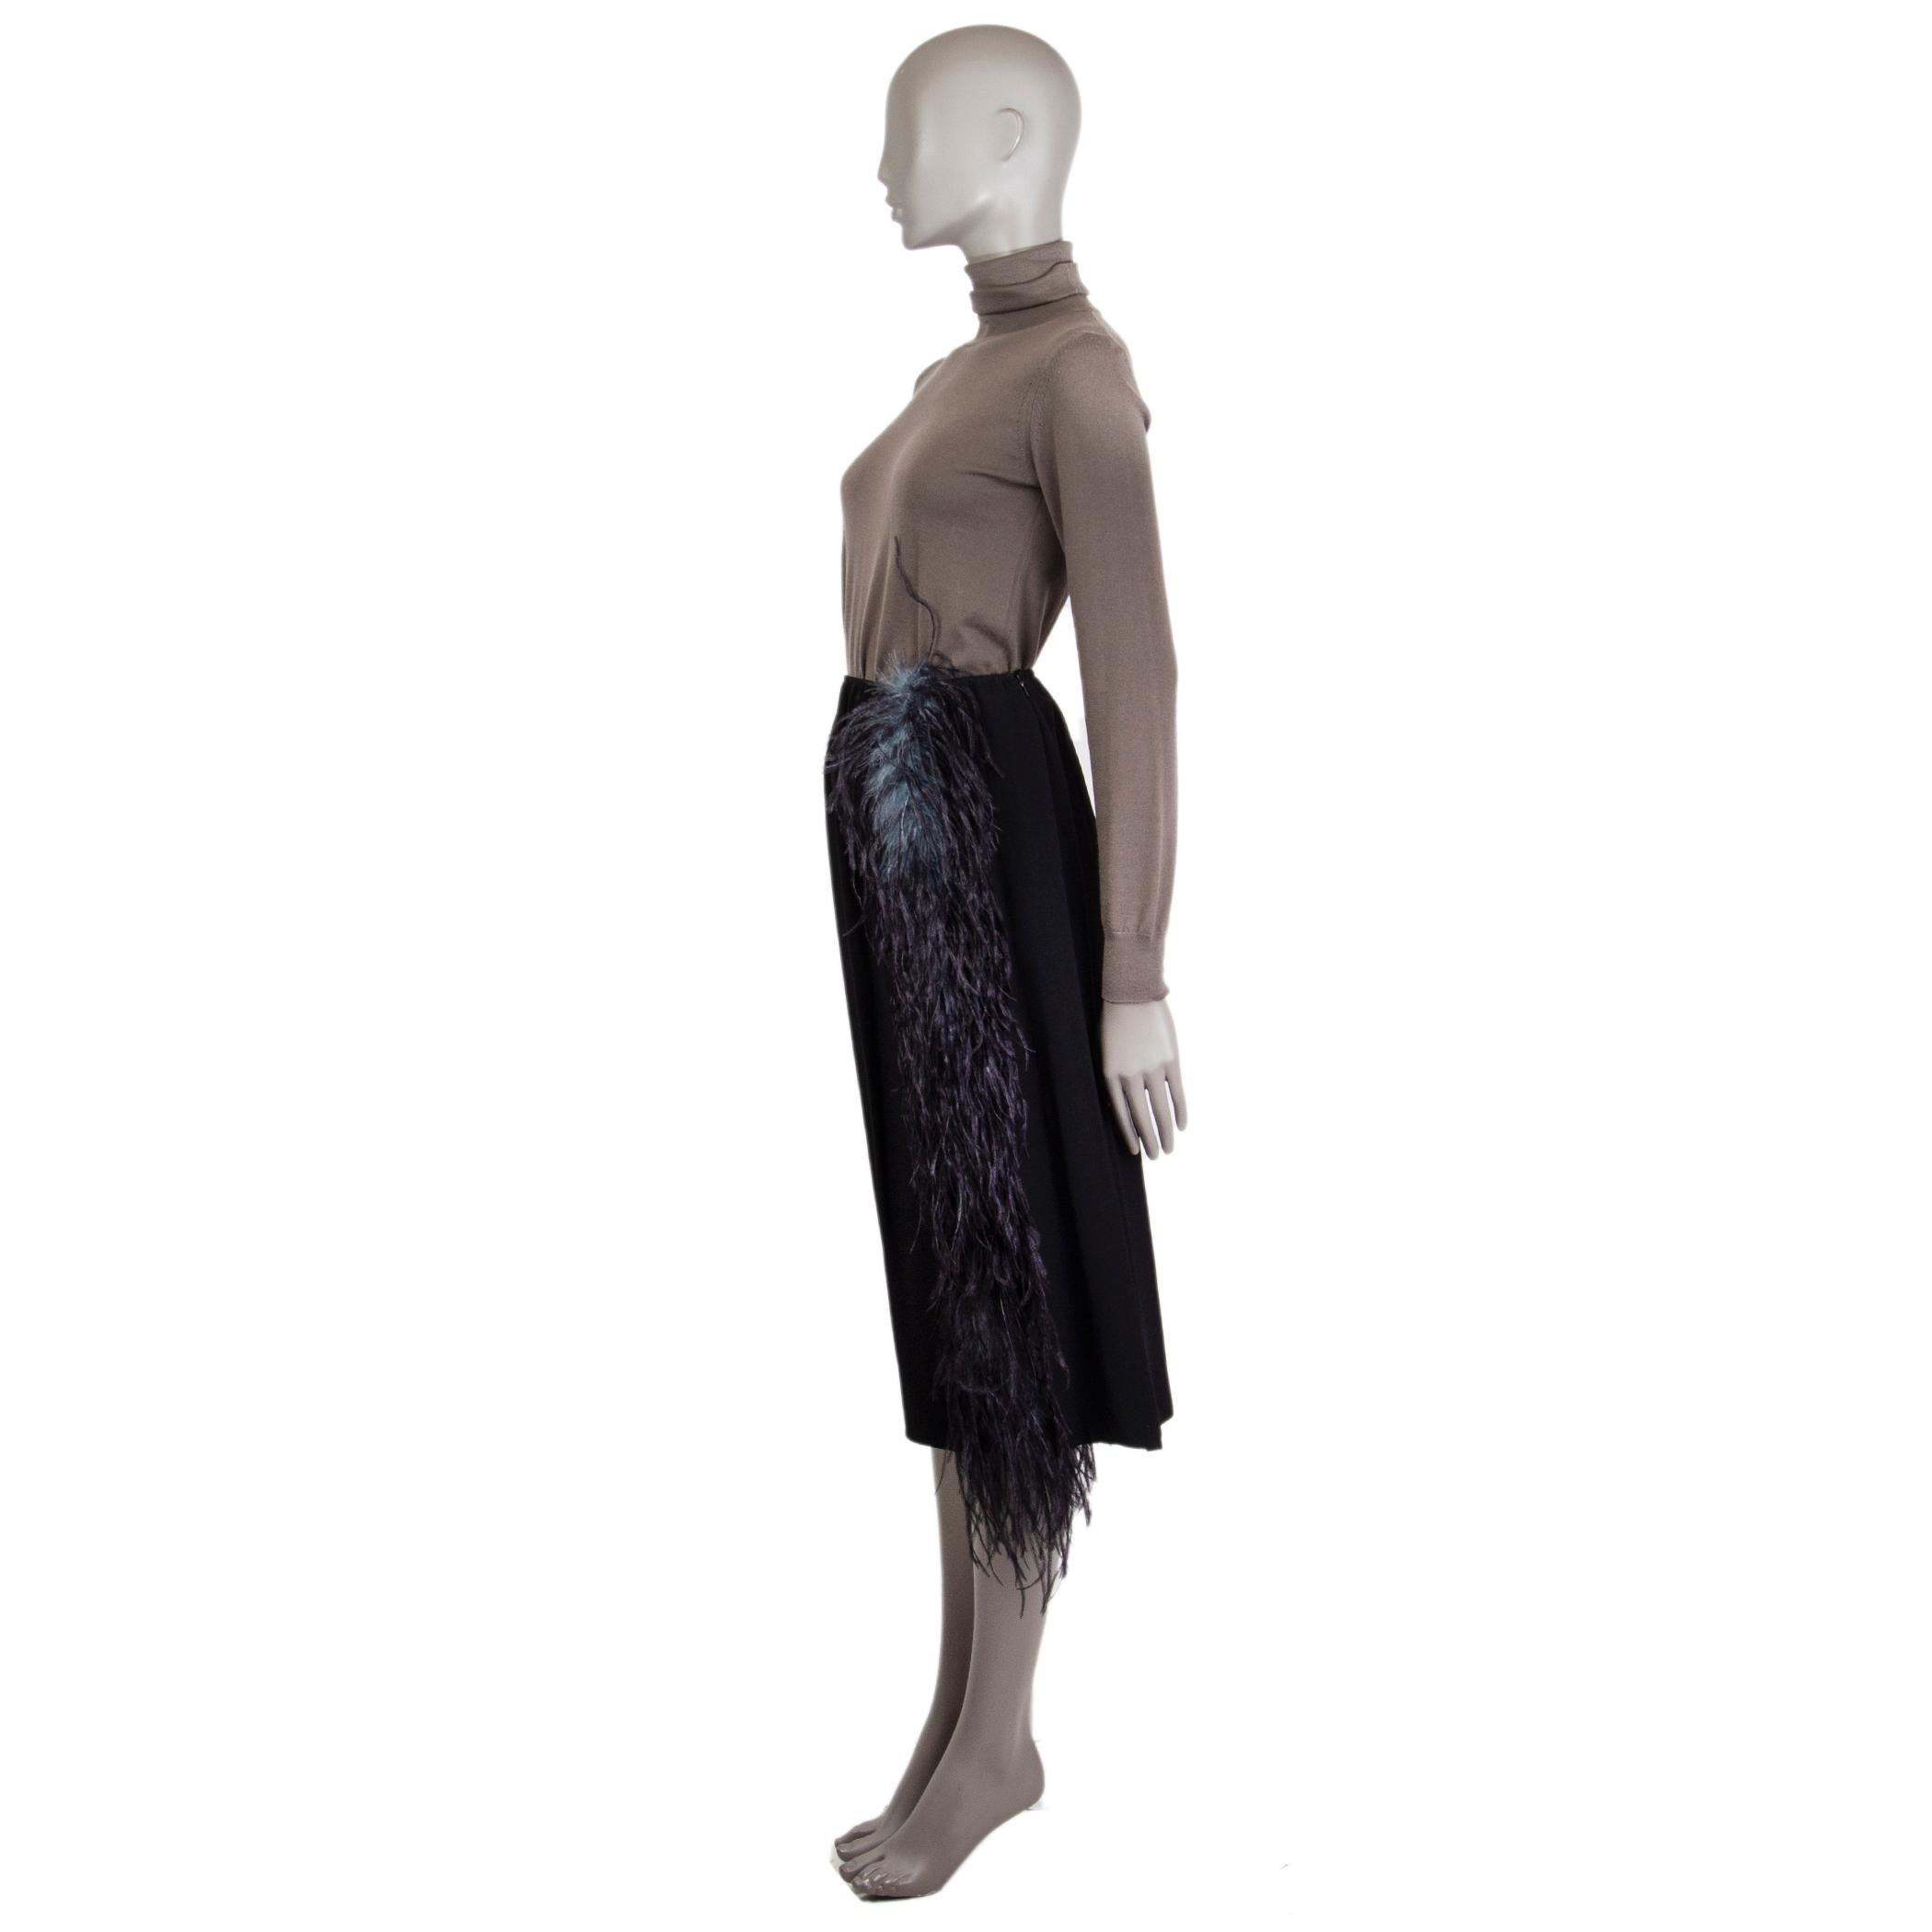 Prada midi skirt in black silk (assumed as tag is missing) and midnight blue and petrol ostrich feathers (assumed as tag is missing). Closes on the side with concealed zipper. Unlined. Has been worn and is in excellent condition. 

Tag Size Missing